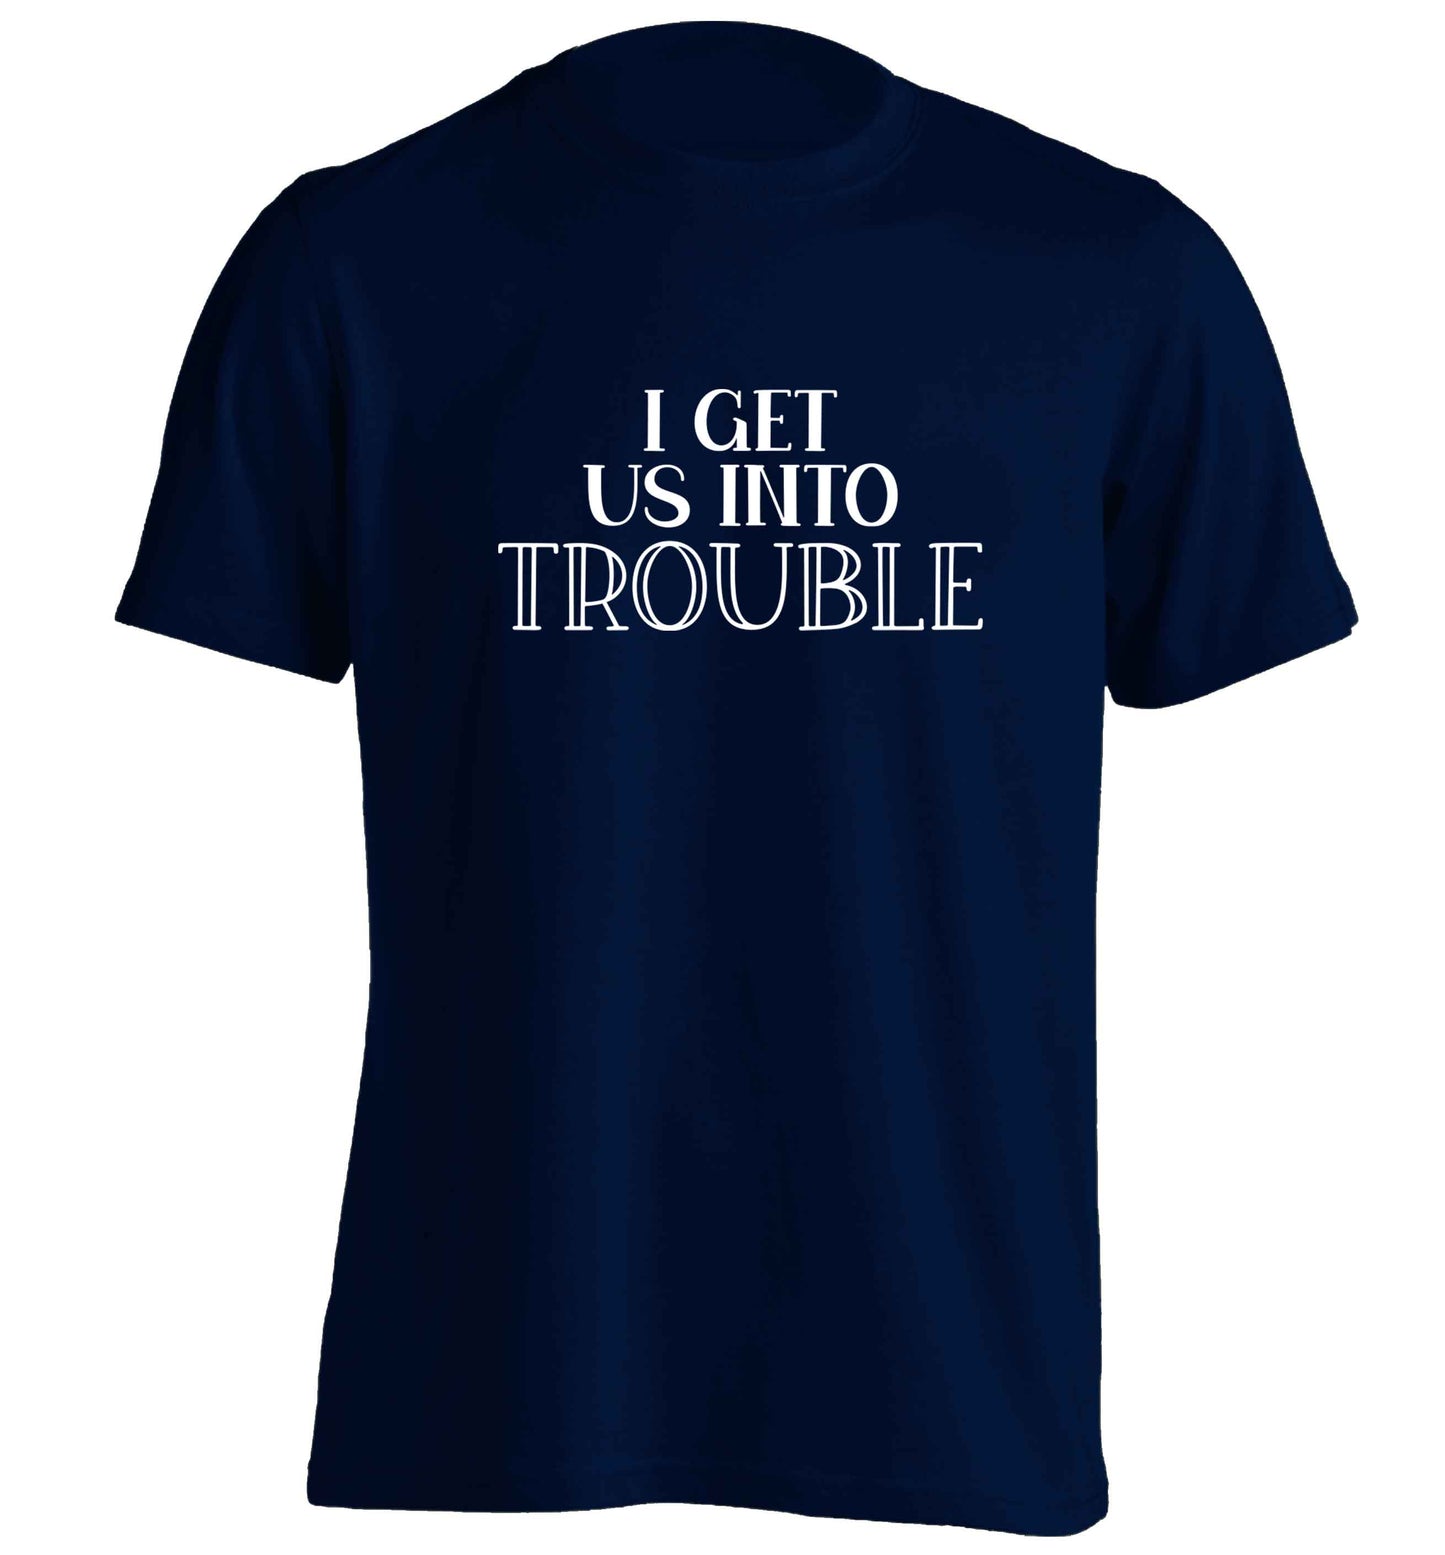 I get us into trouble adults unisex navy Tshirt 2XL